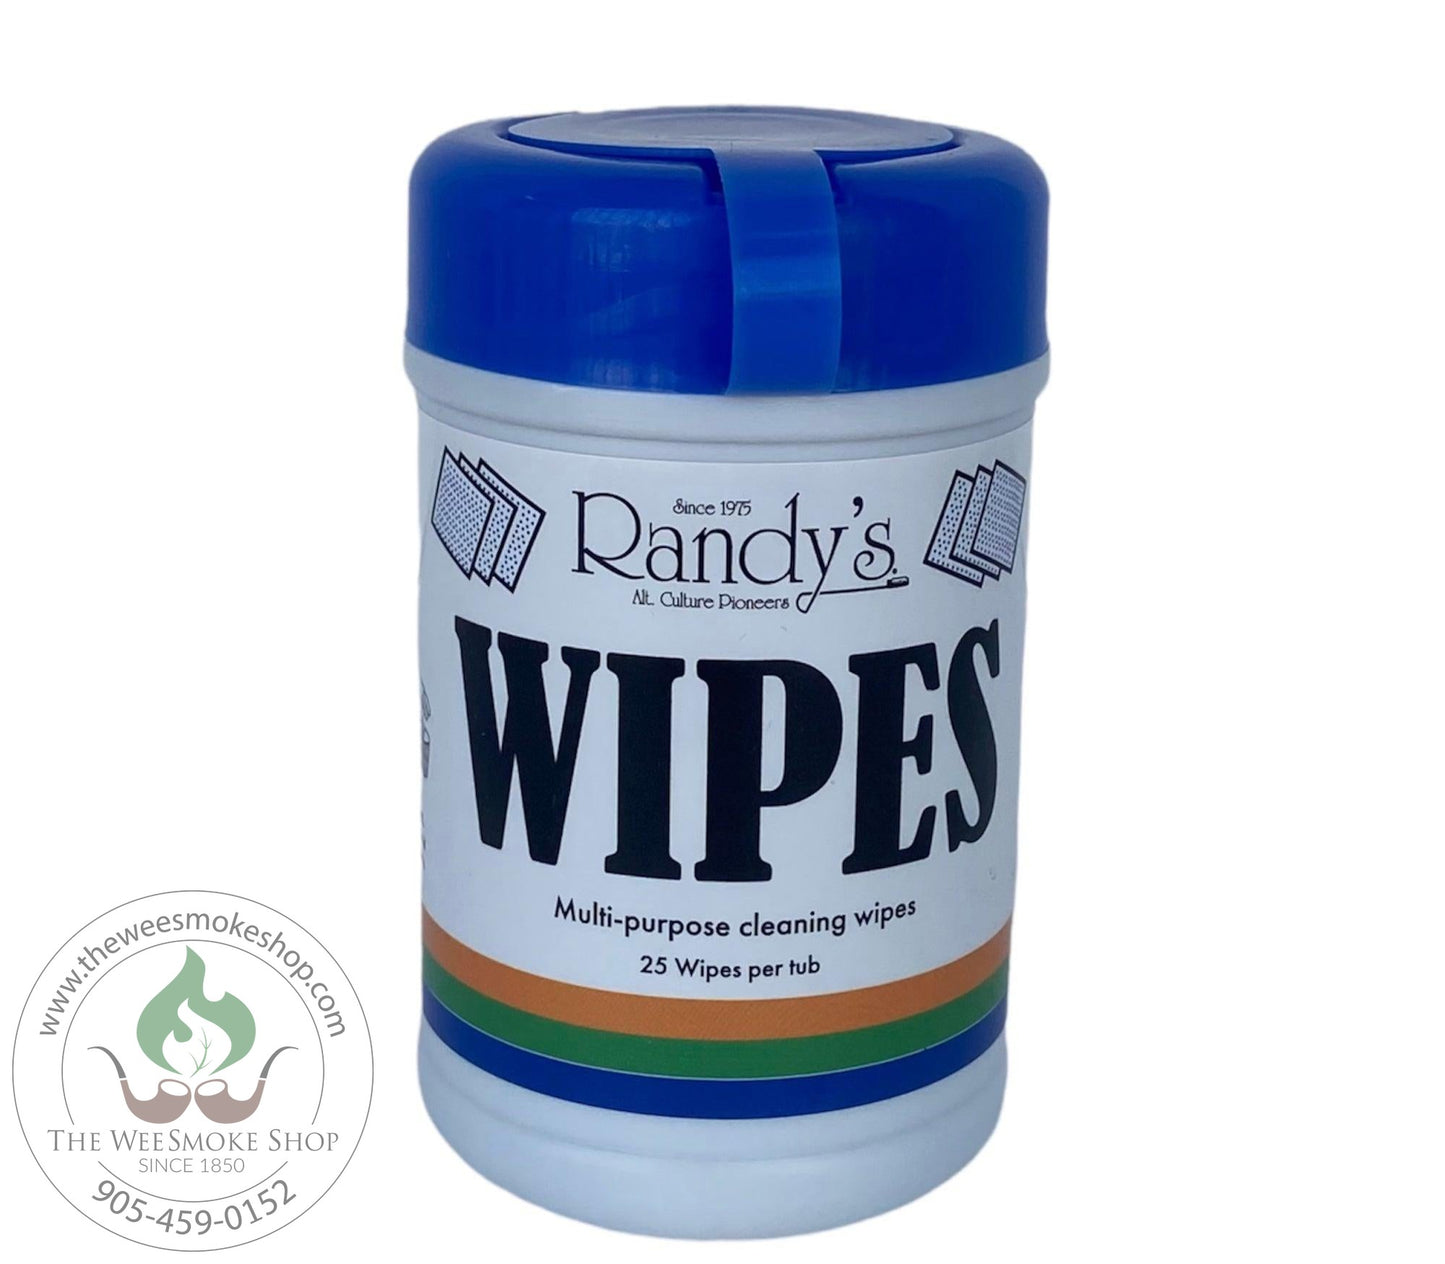 Randy's Multipurpose Cleaning Wipes